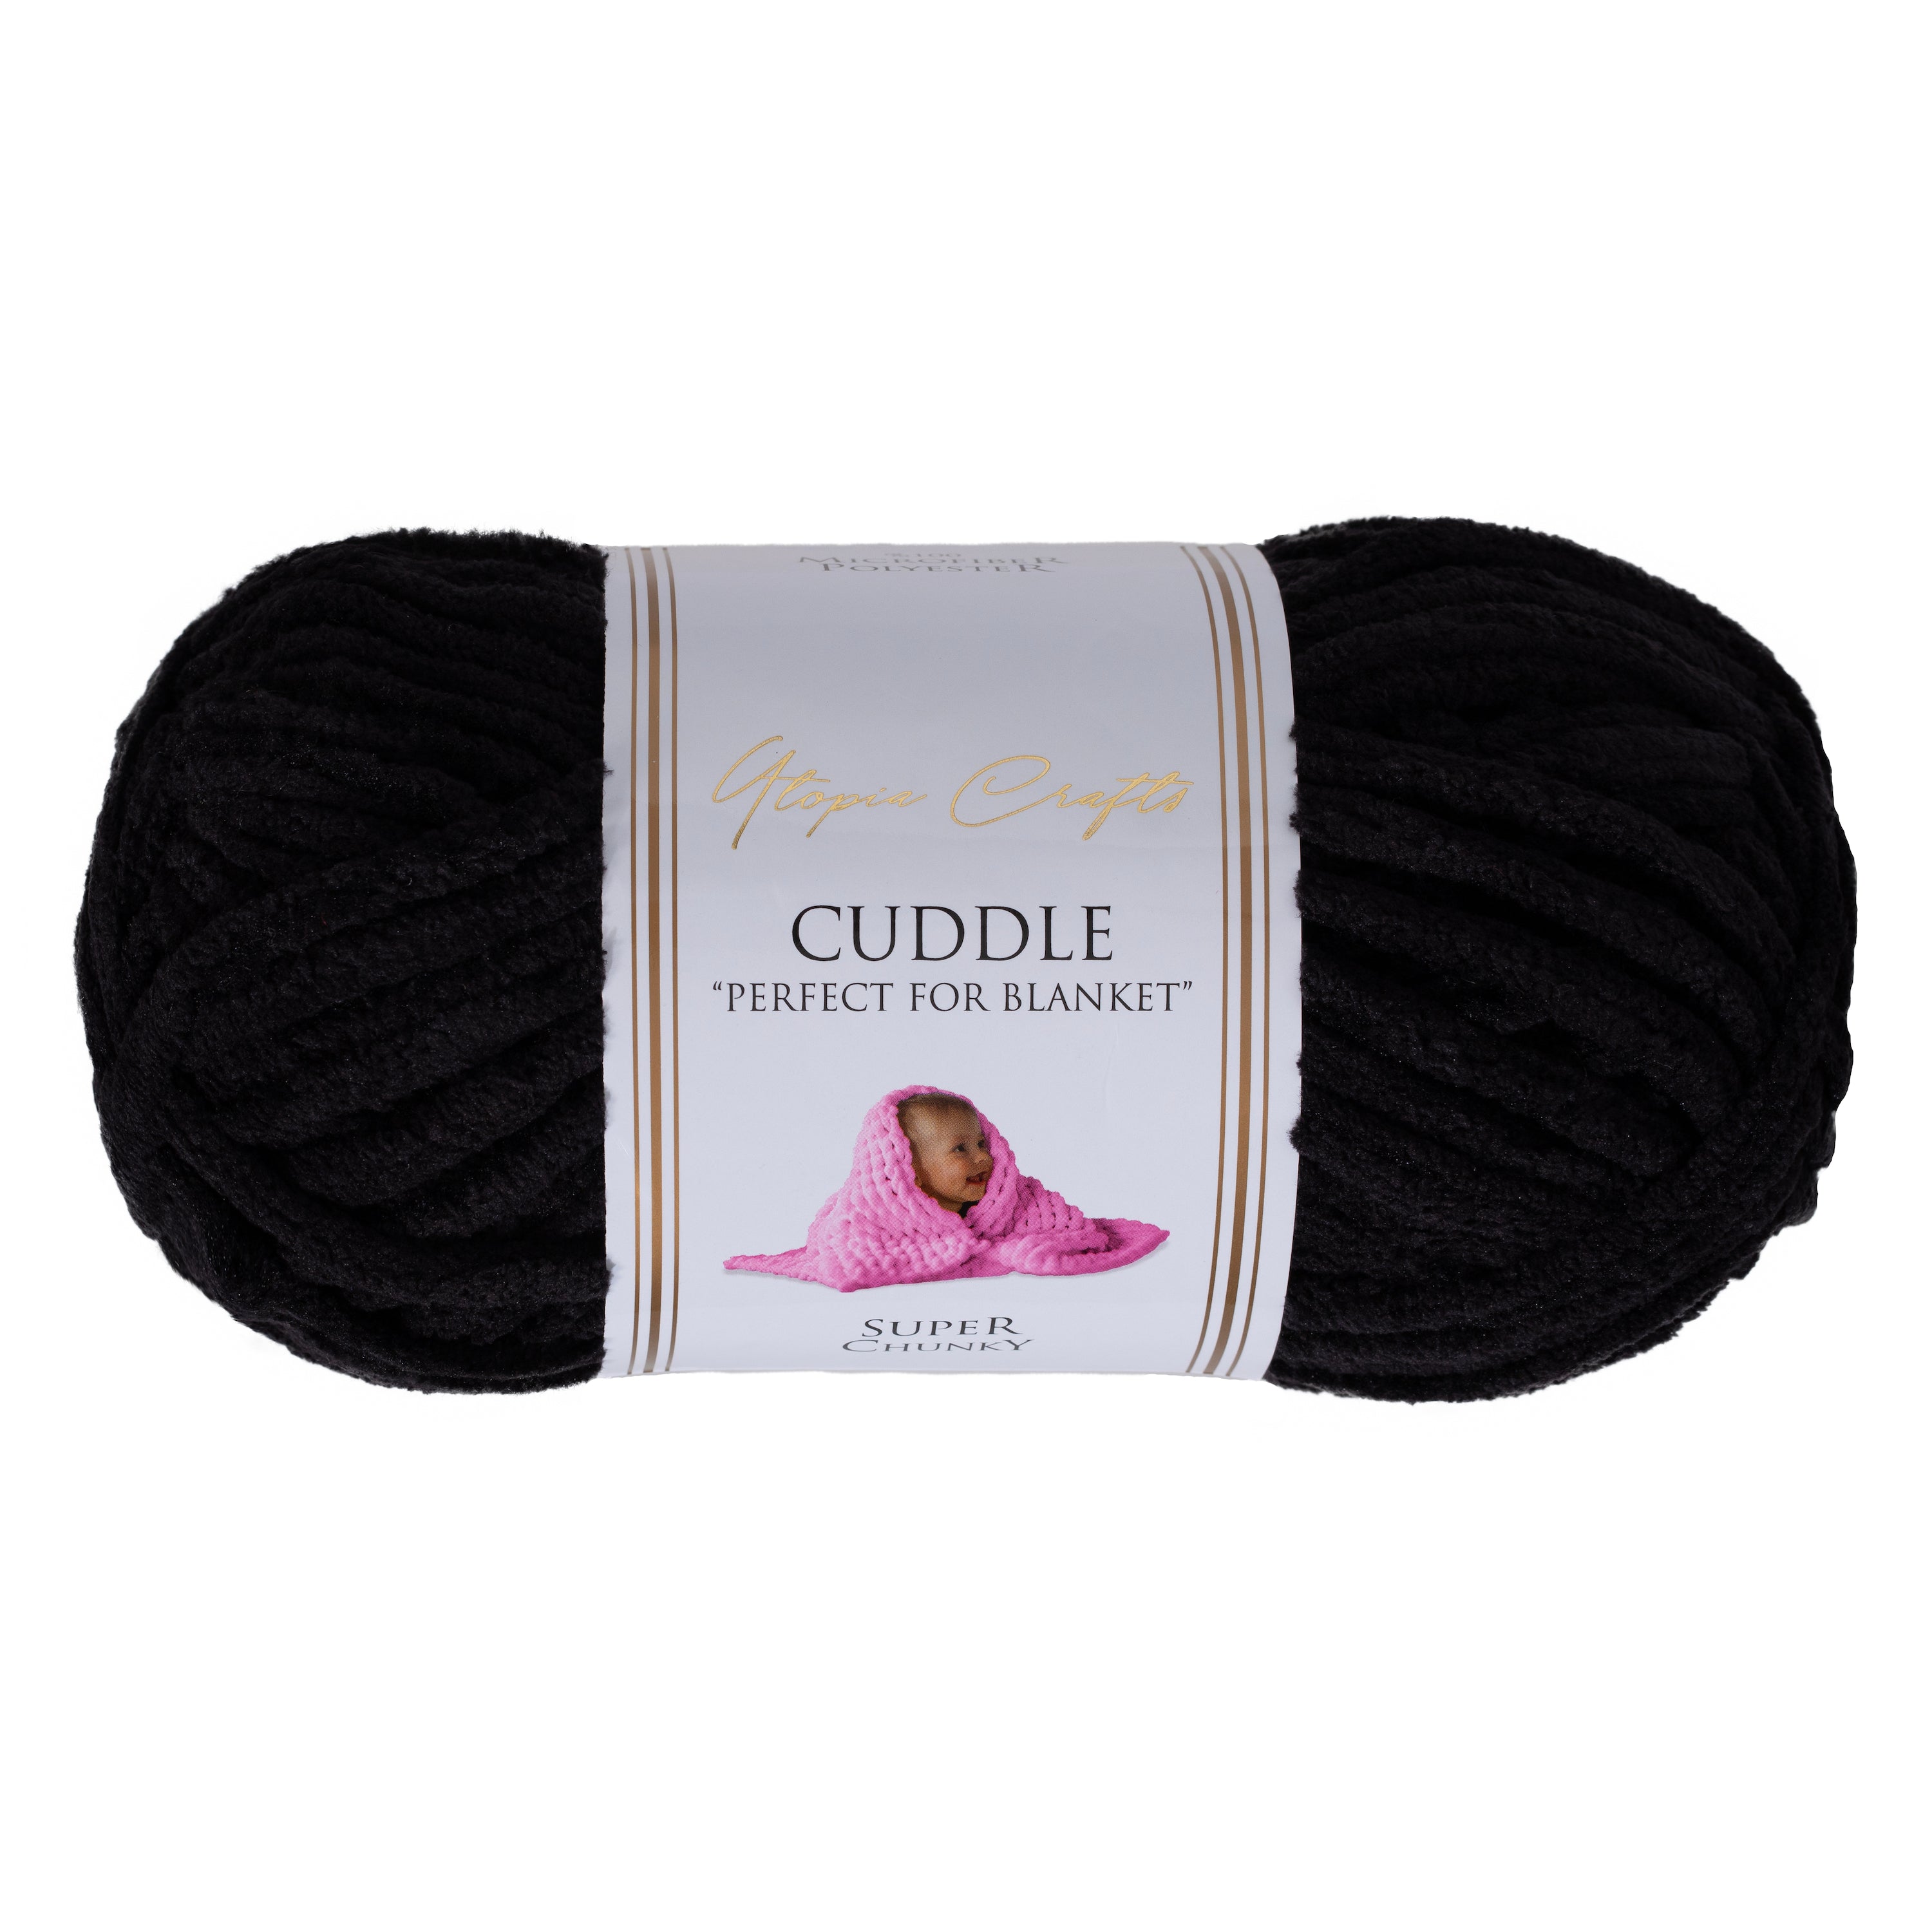 Utopia Crafts Cuddle Super Chunky Chenille Soft Yarn for Knitting and Crochet, 100g - 60m (Black)